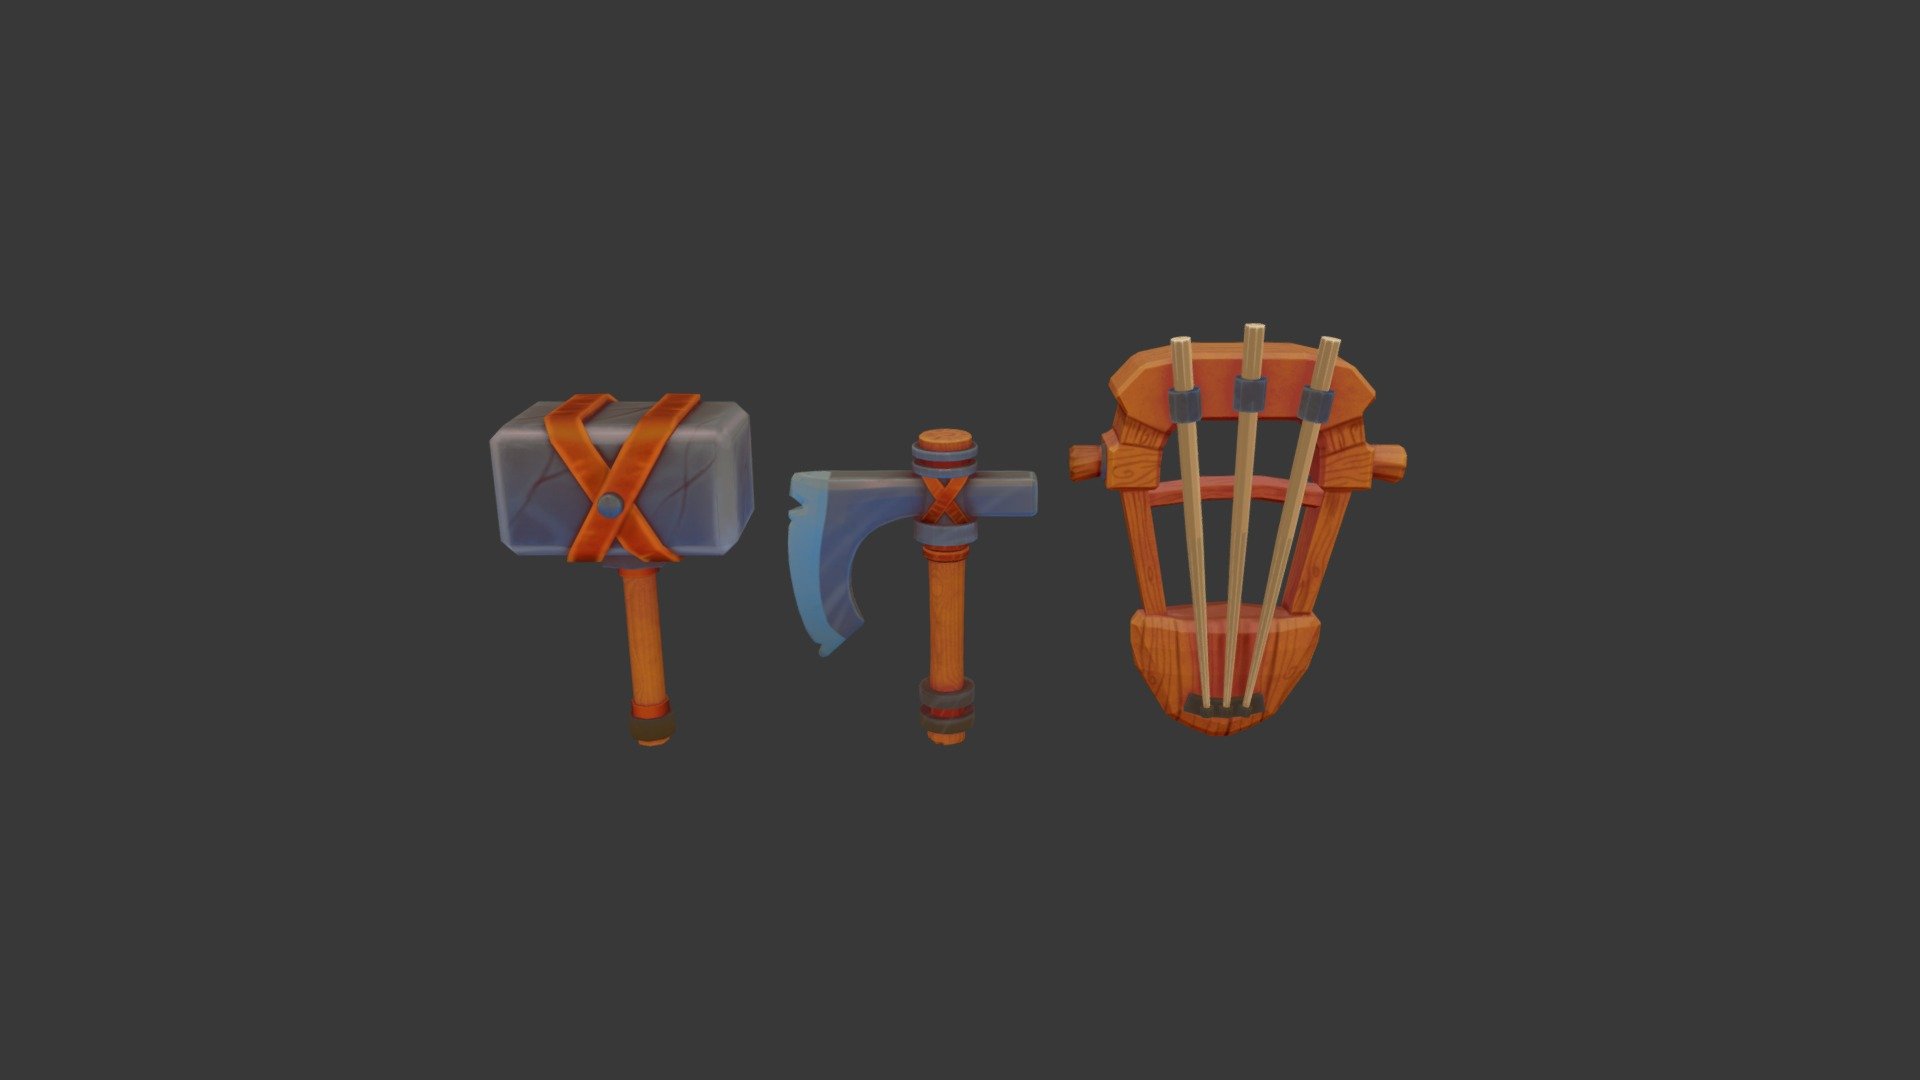 Weapon textures I made for a game school project, “Beer &amp; Plunder”.  https://www.artstation.com/artwork/nYVBwX

Weapon concept and modeling made by Linda Davidsson https://www.artstation.com/davidssonart - Beer & Plunder - Weapons - 3D model by tiinea 3d model